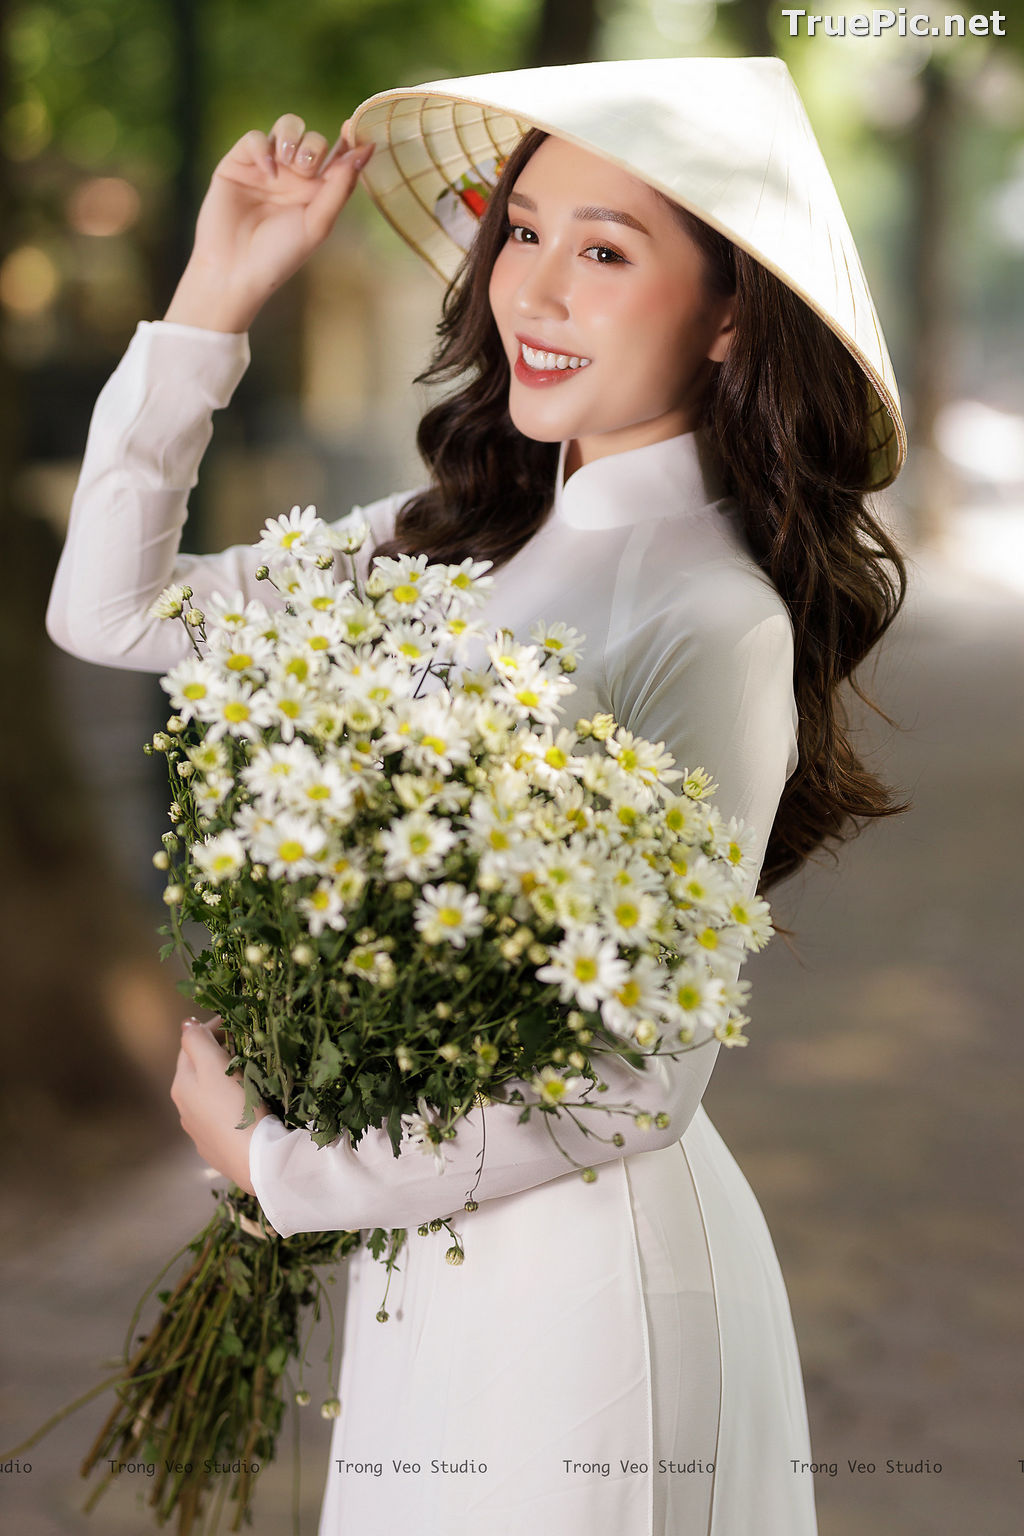 Image The Beauty of Vietnamese Girls with Traditional Dress (Ao Dai) #1 - TruePic.net - Picture-11